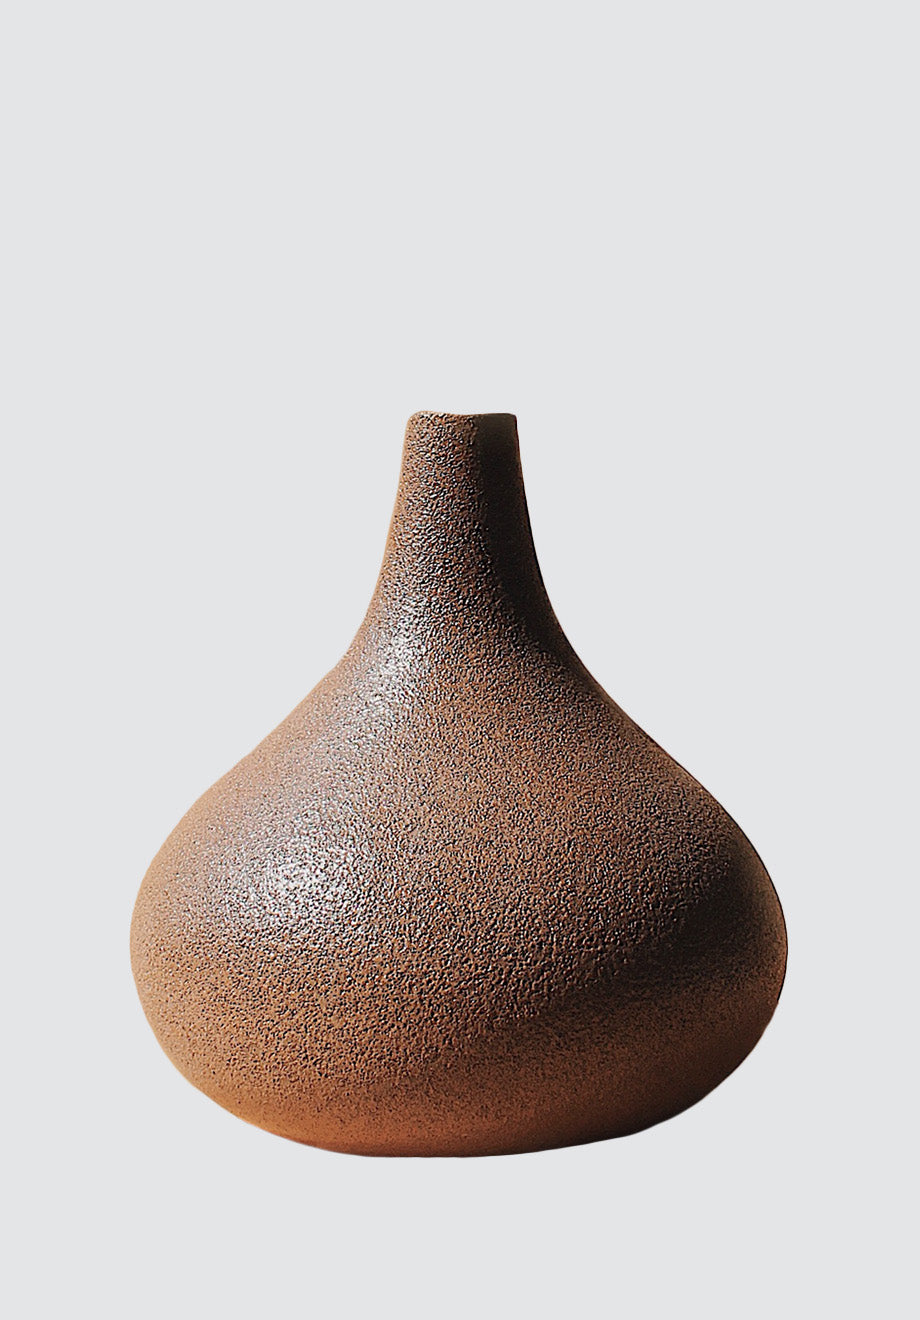 Limited Edition | Hydria Vase